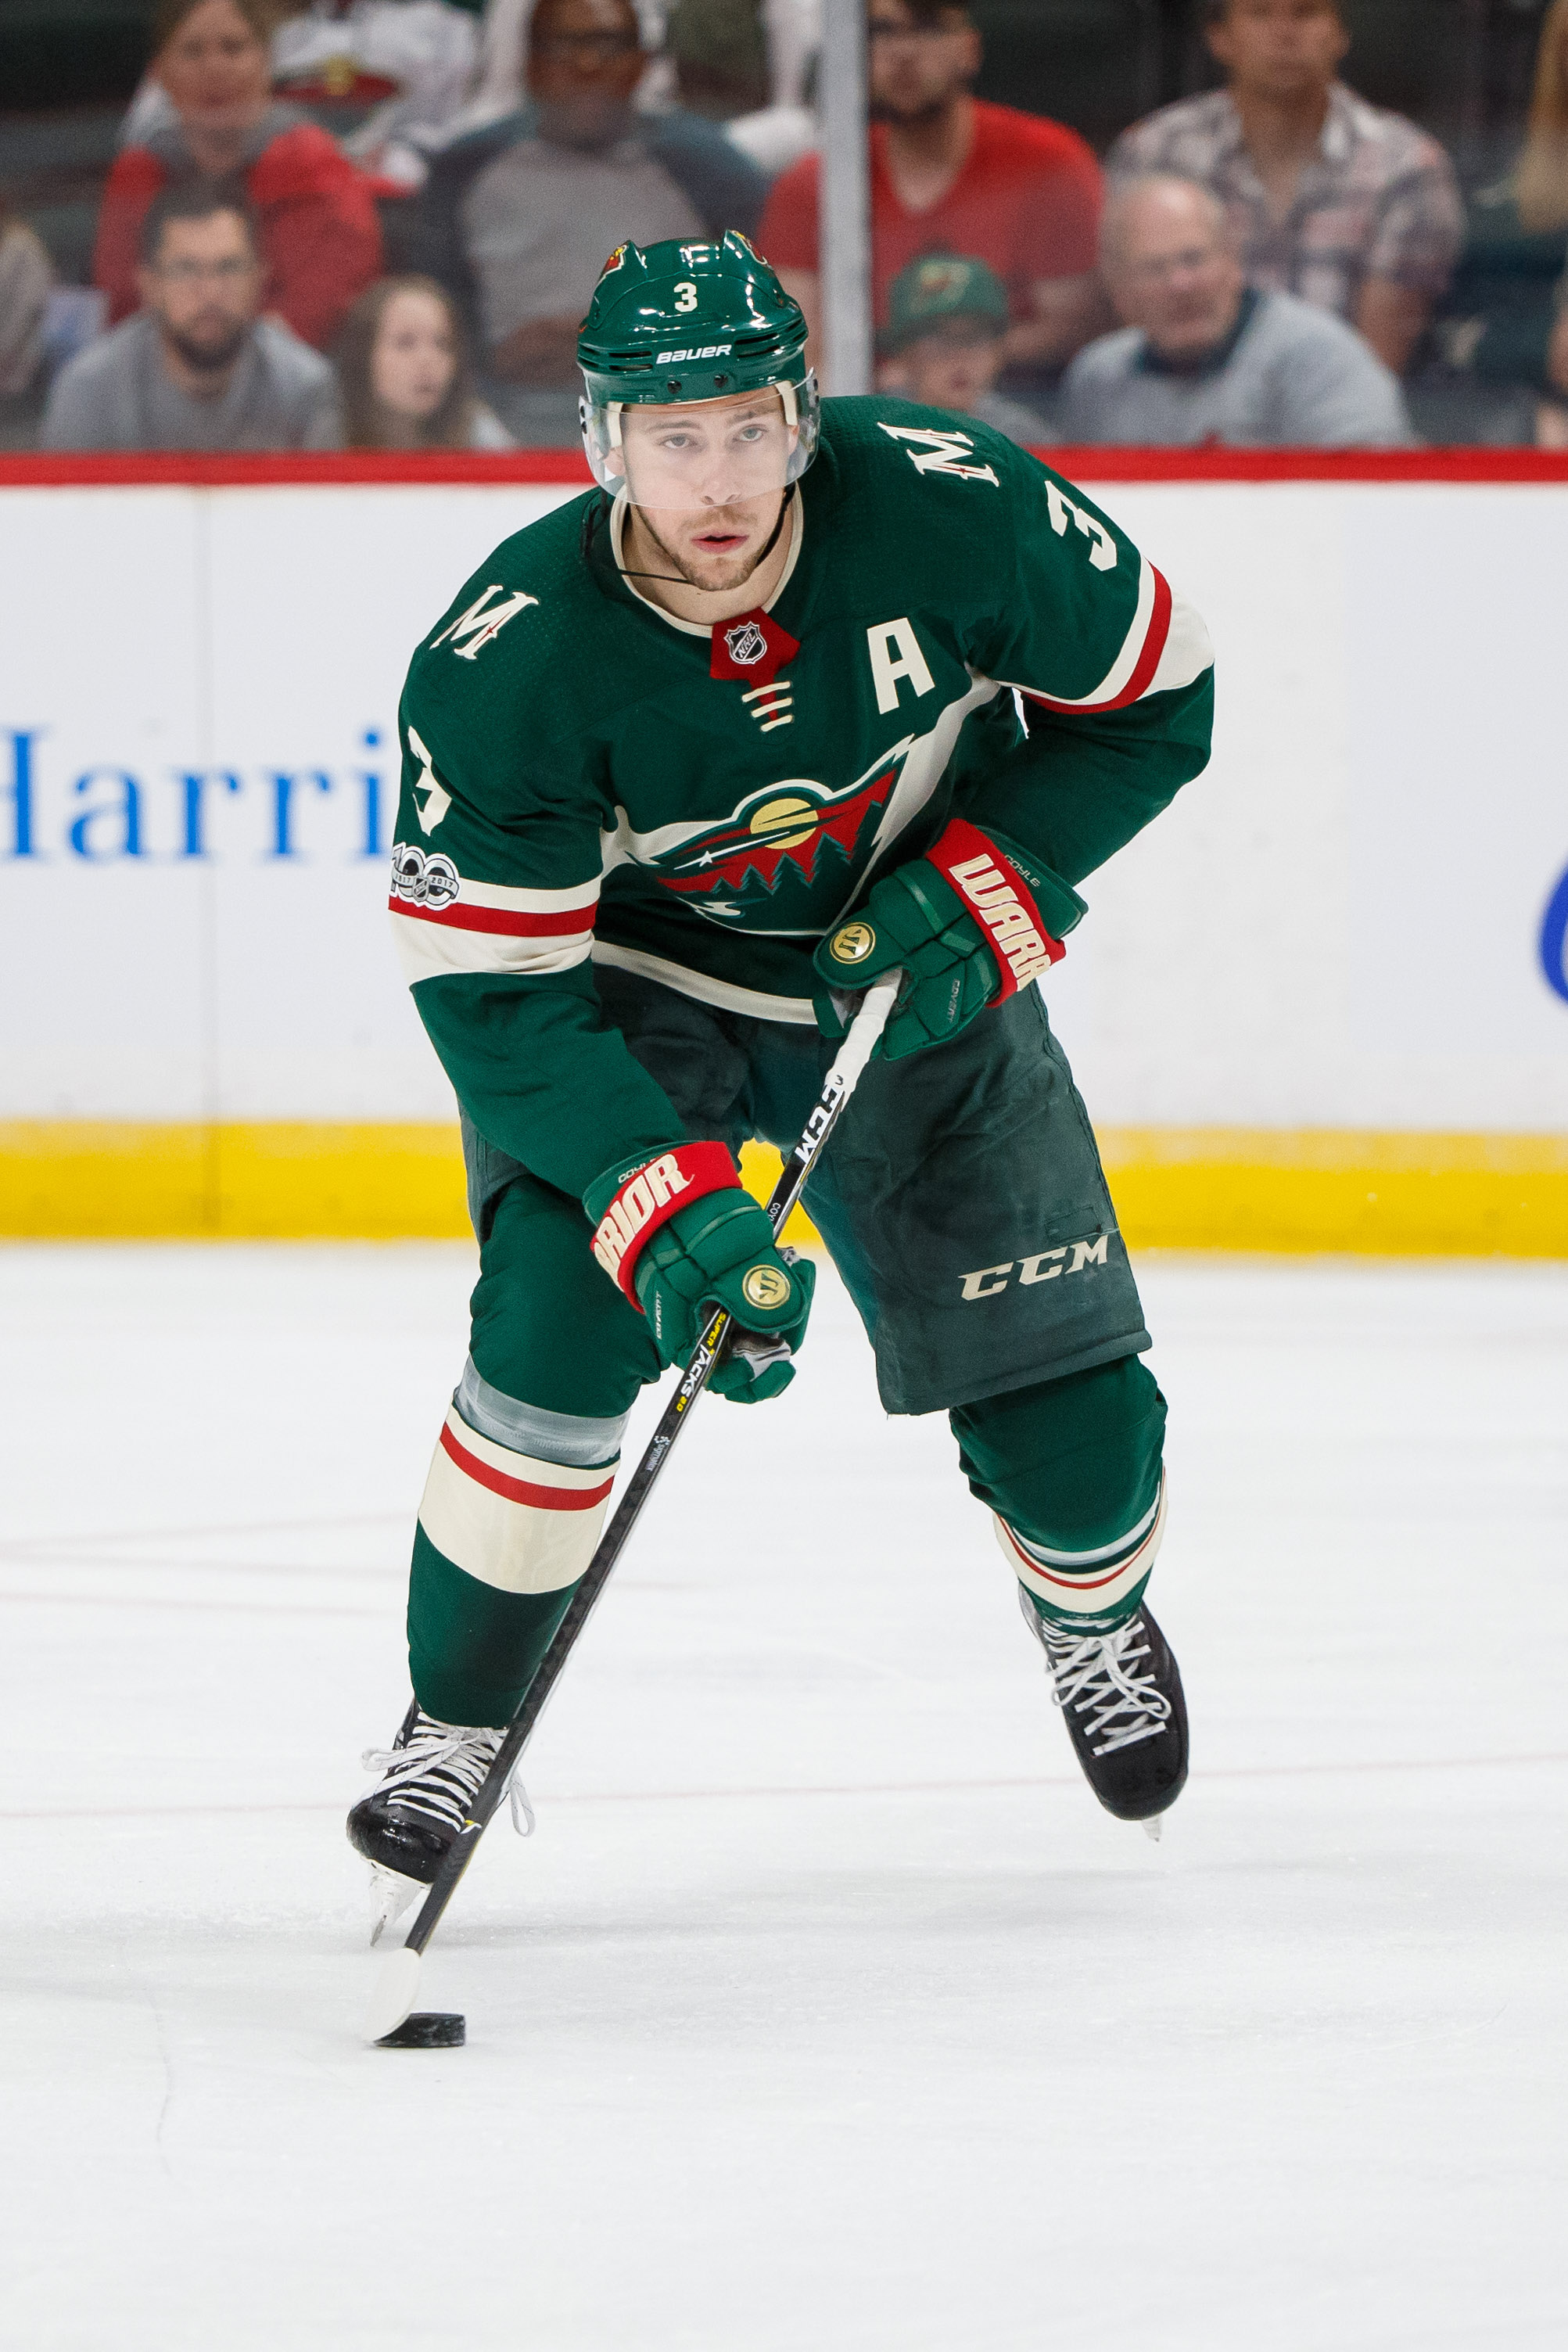 Charlie Coyle Hockey Stats and Profile at